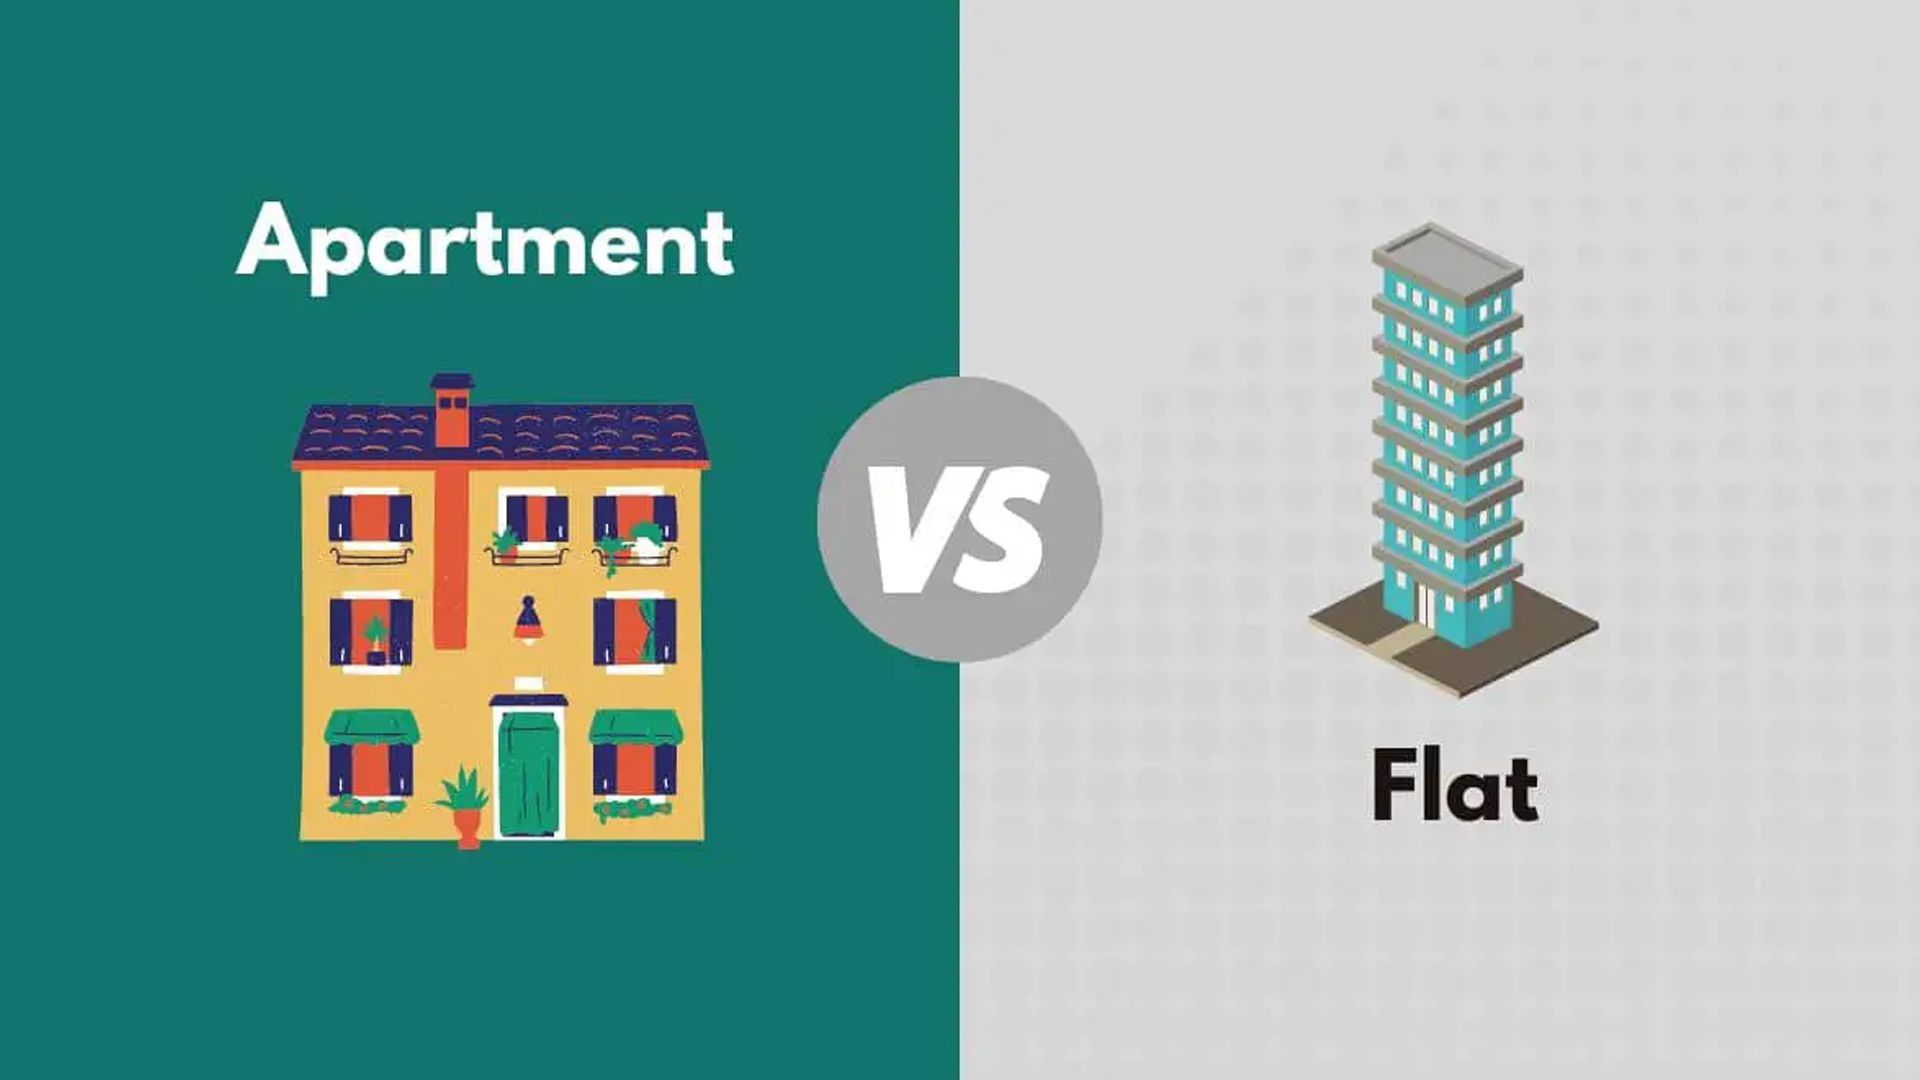 Flat And Apartment; Is It The Same Or Different?